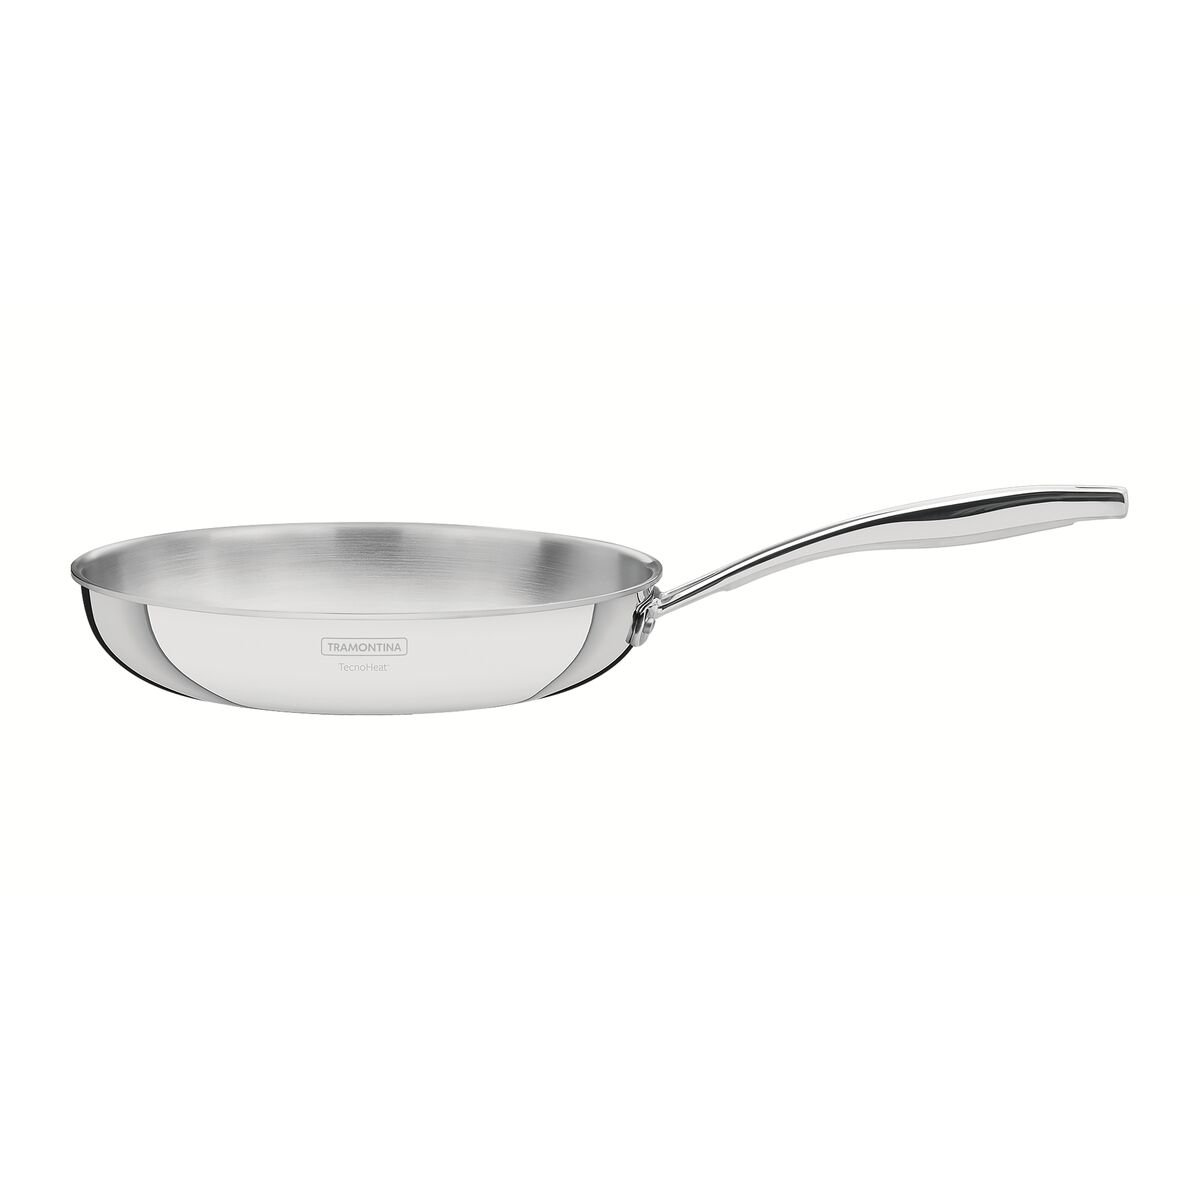 Tramontina Grano 26 cm 2.2 L shallow stainless steel frying pan with tri-ply body and long handle